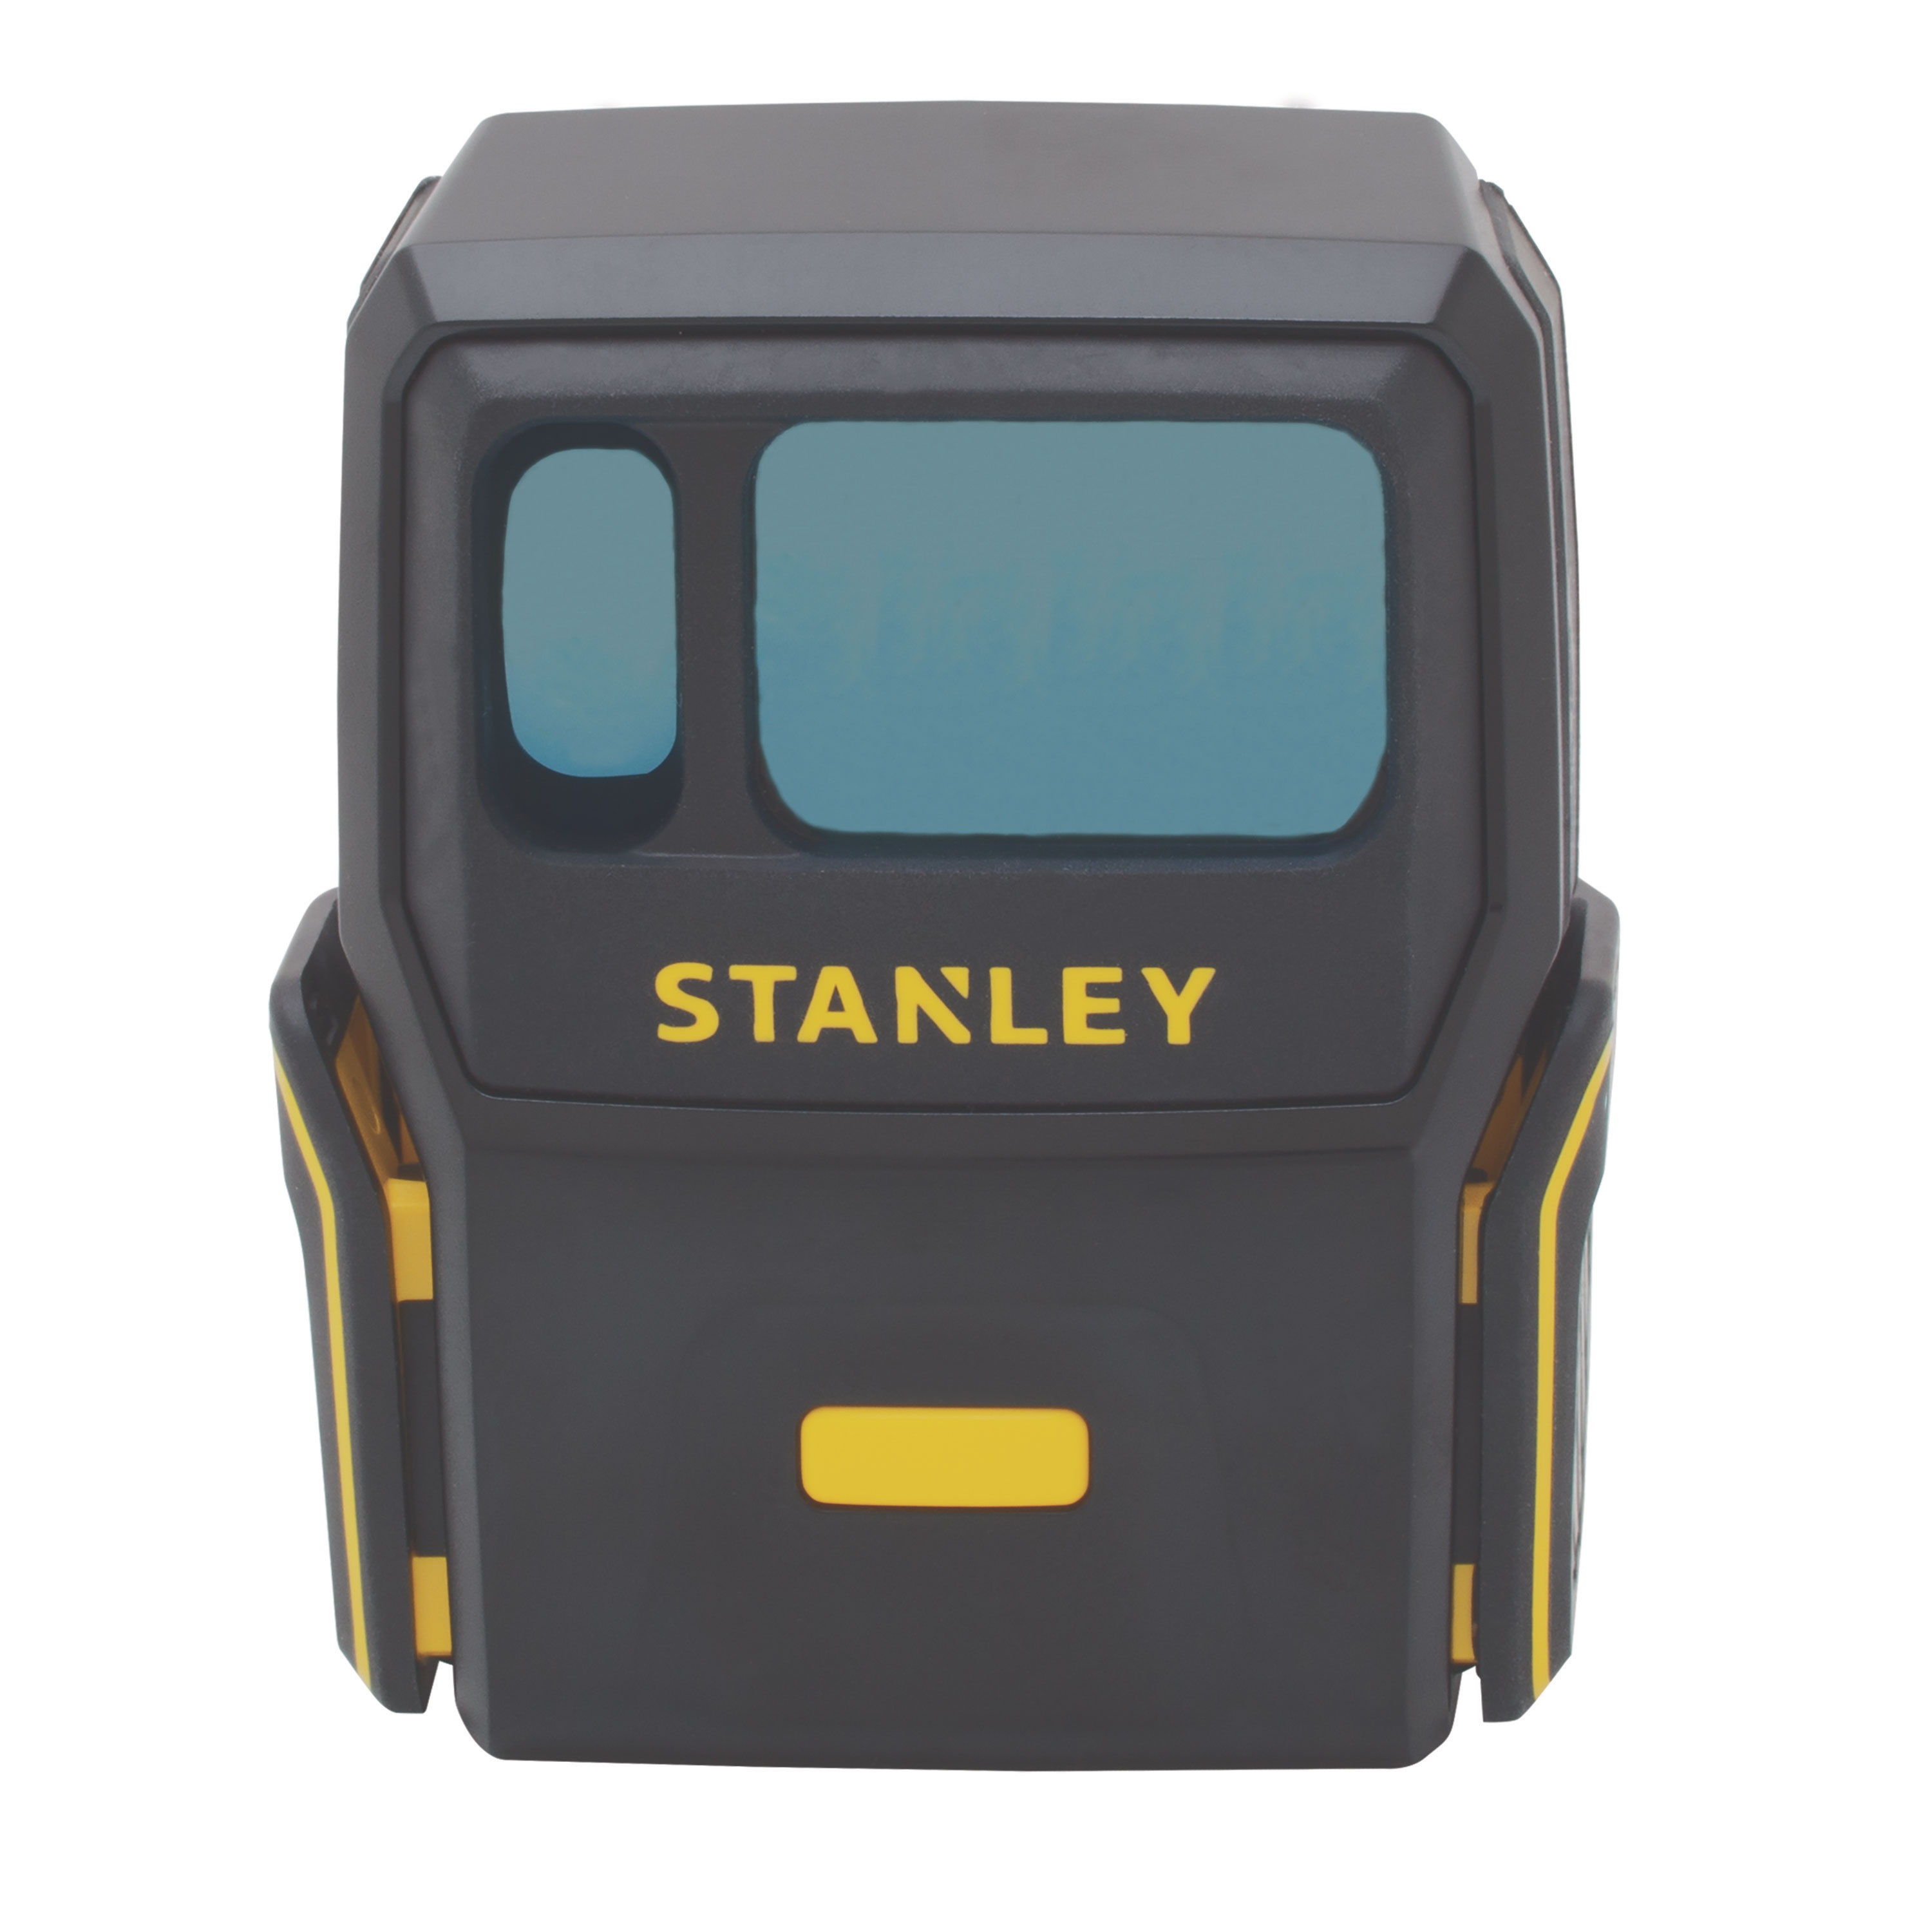 Images of Stanley | 3000x3000